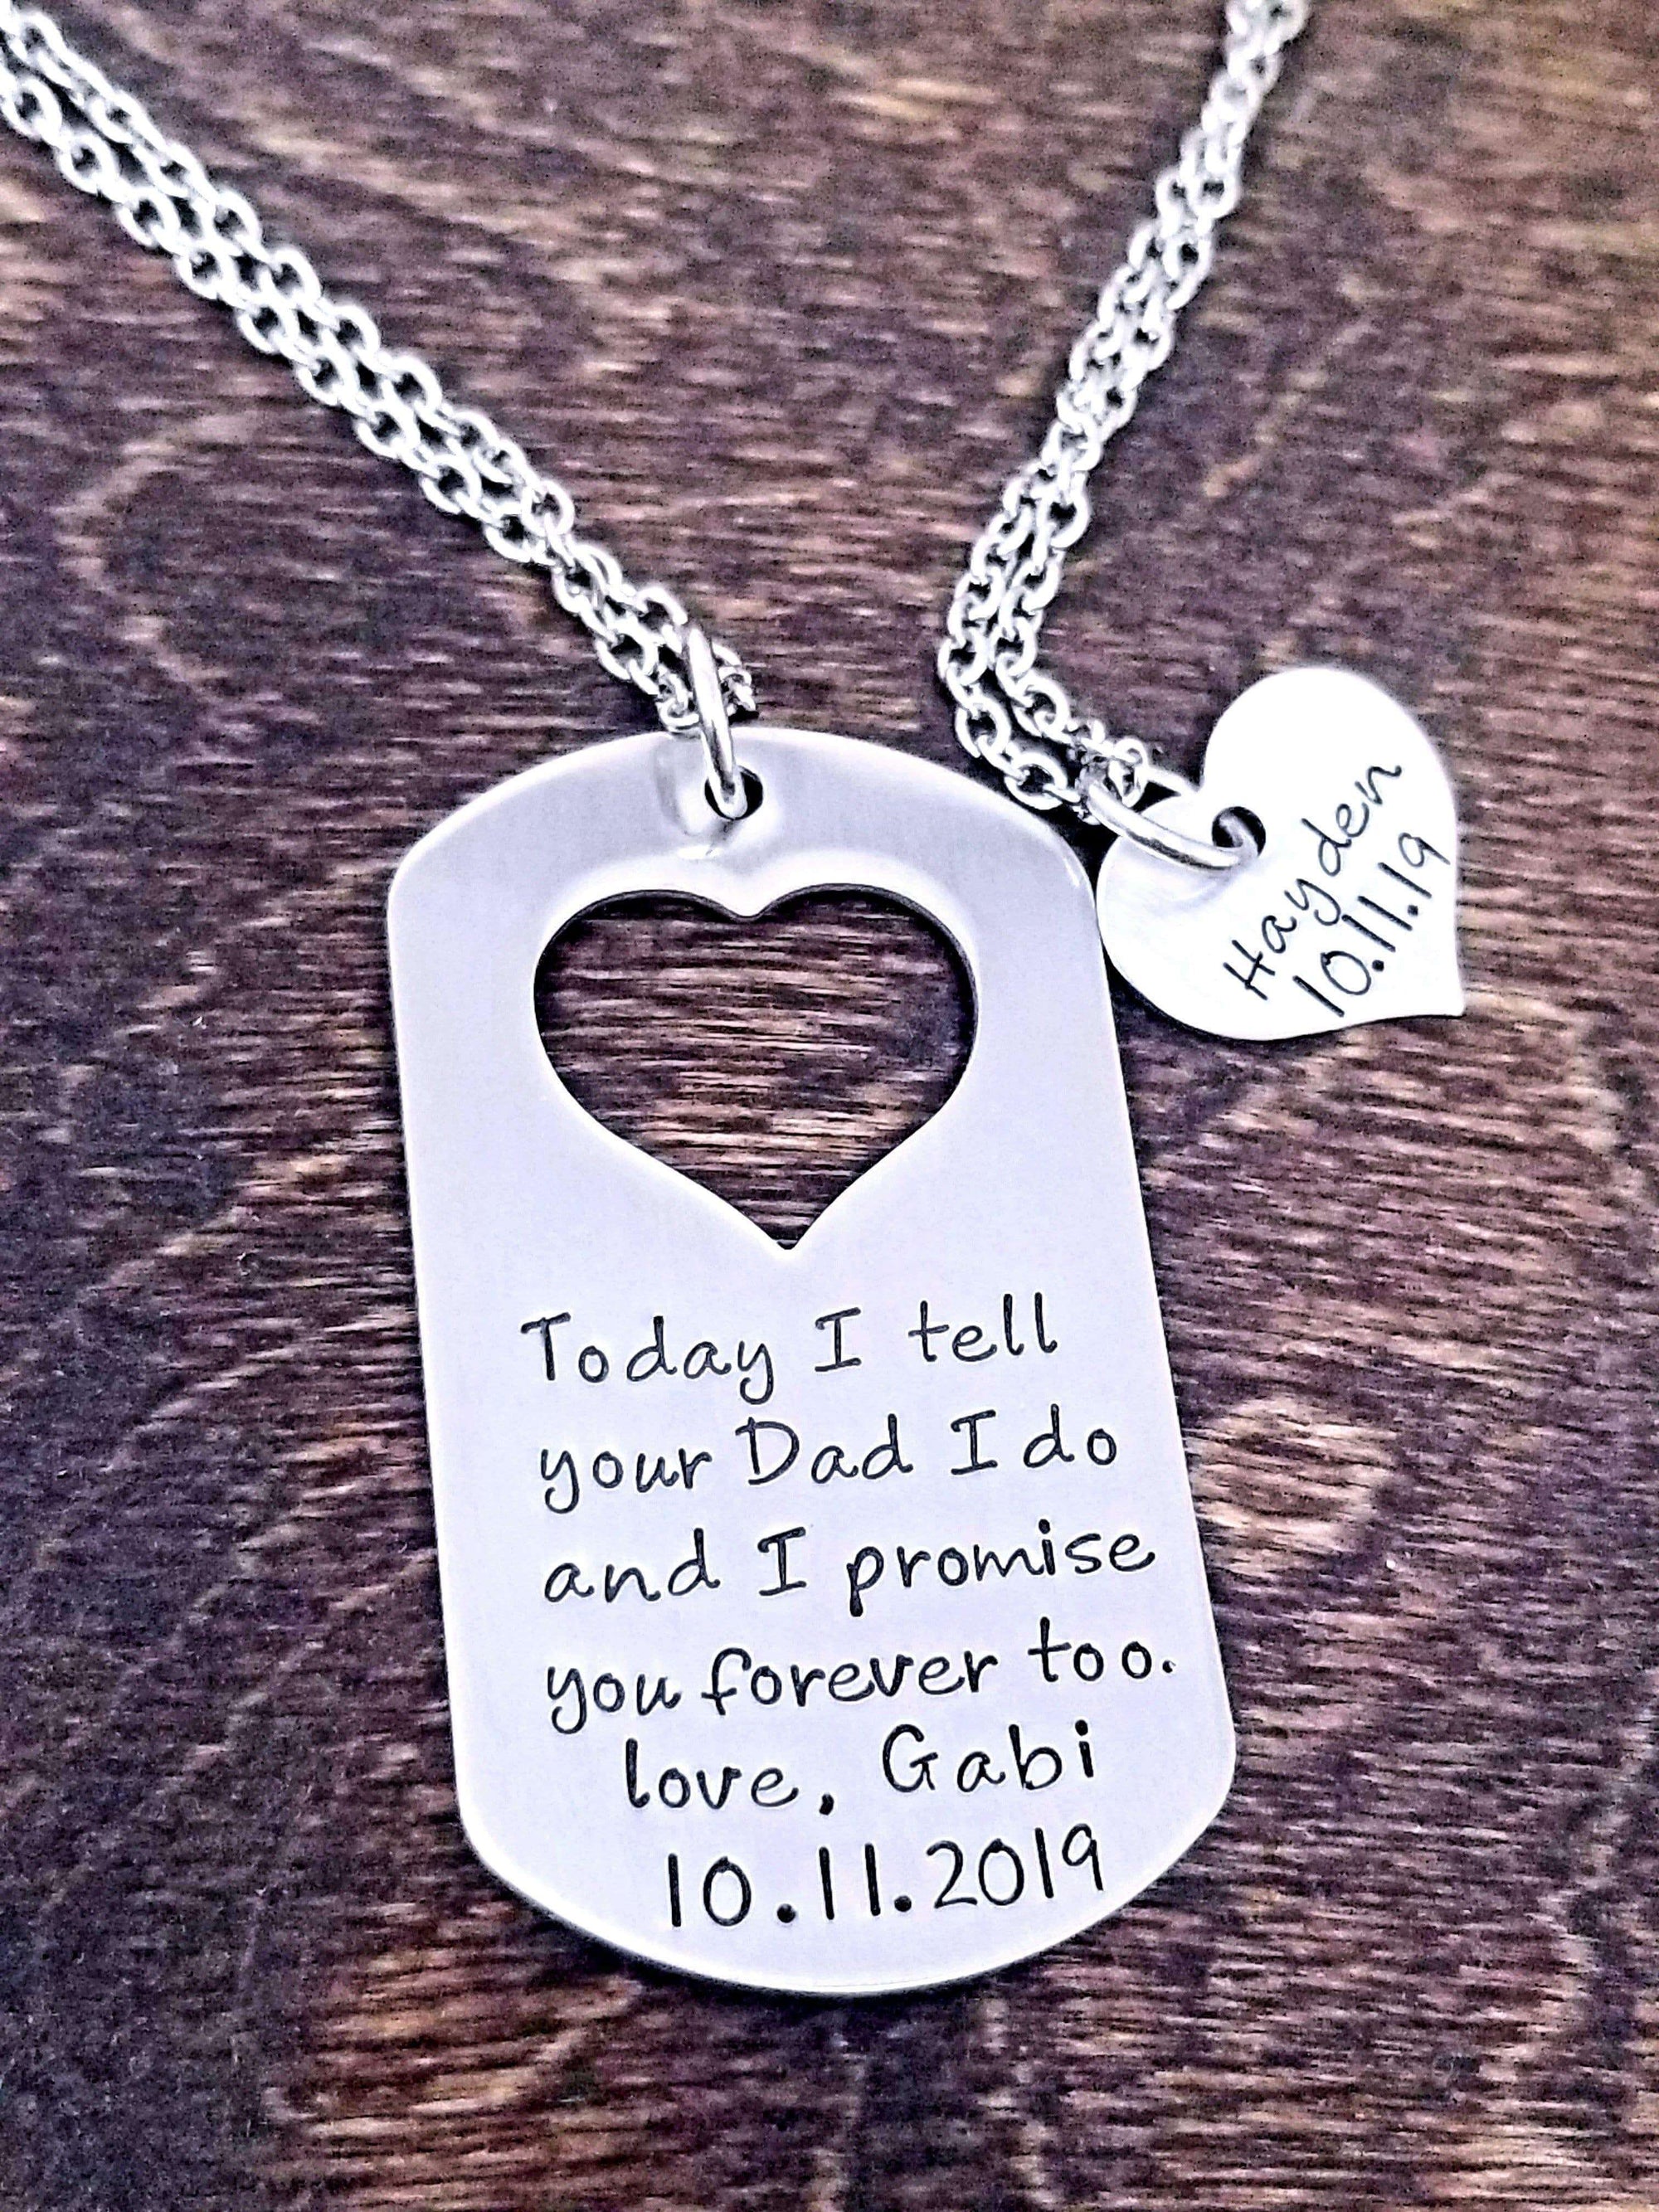 Personalized Gift Wedding, Wedding gift for step children, Step son gift, Step daughter gift, Necklaces, HandmadeLoveStories, HandmadeLoveStories , [Handmade_Love_Stories], [Hand_Stamped_Jewelry], [Etsy_Stamped_Jewelry], [Etsy_Jewelry]